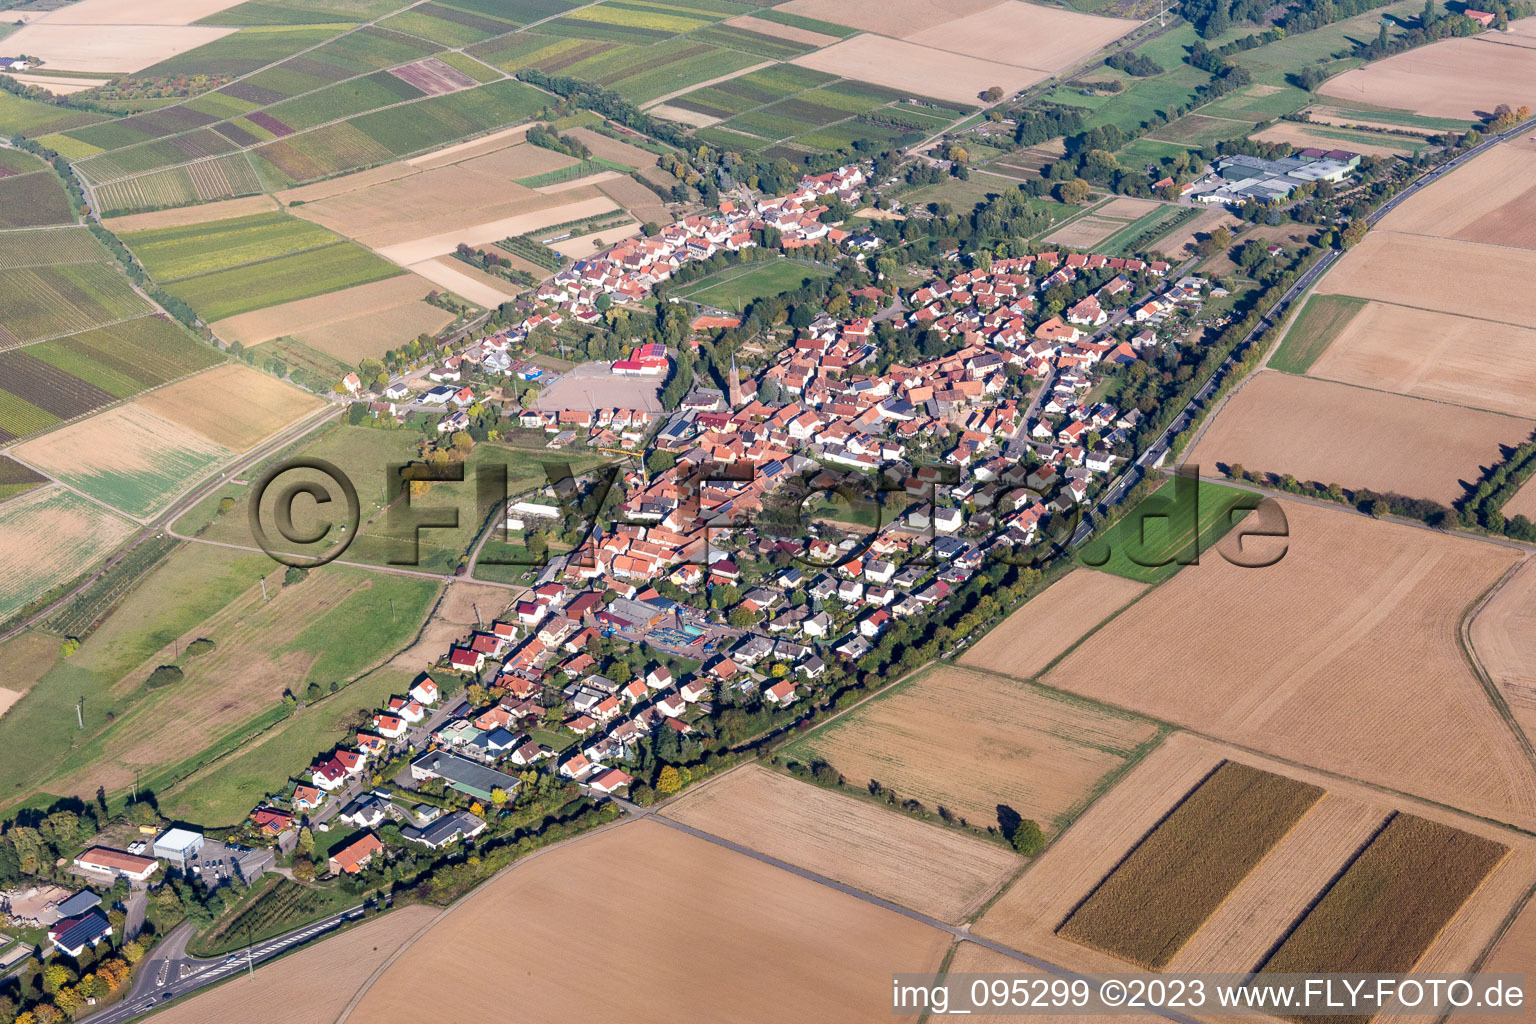 District Kapellen in Kapellen-Drusweiler in the state Rhineland-Palatinate, Germany from above